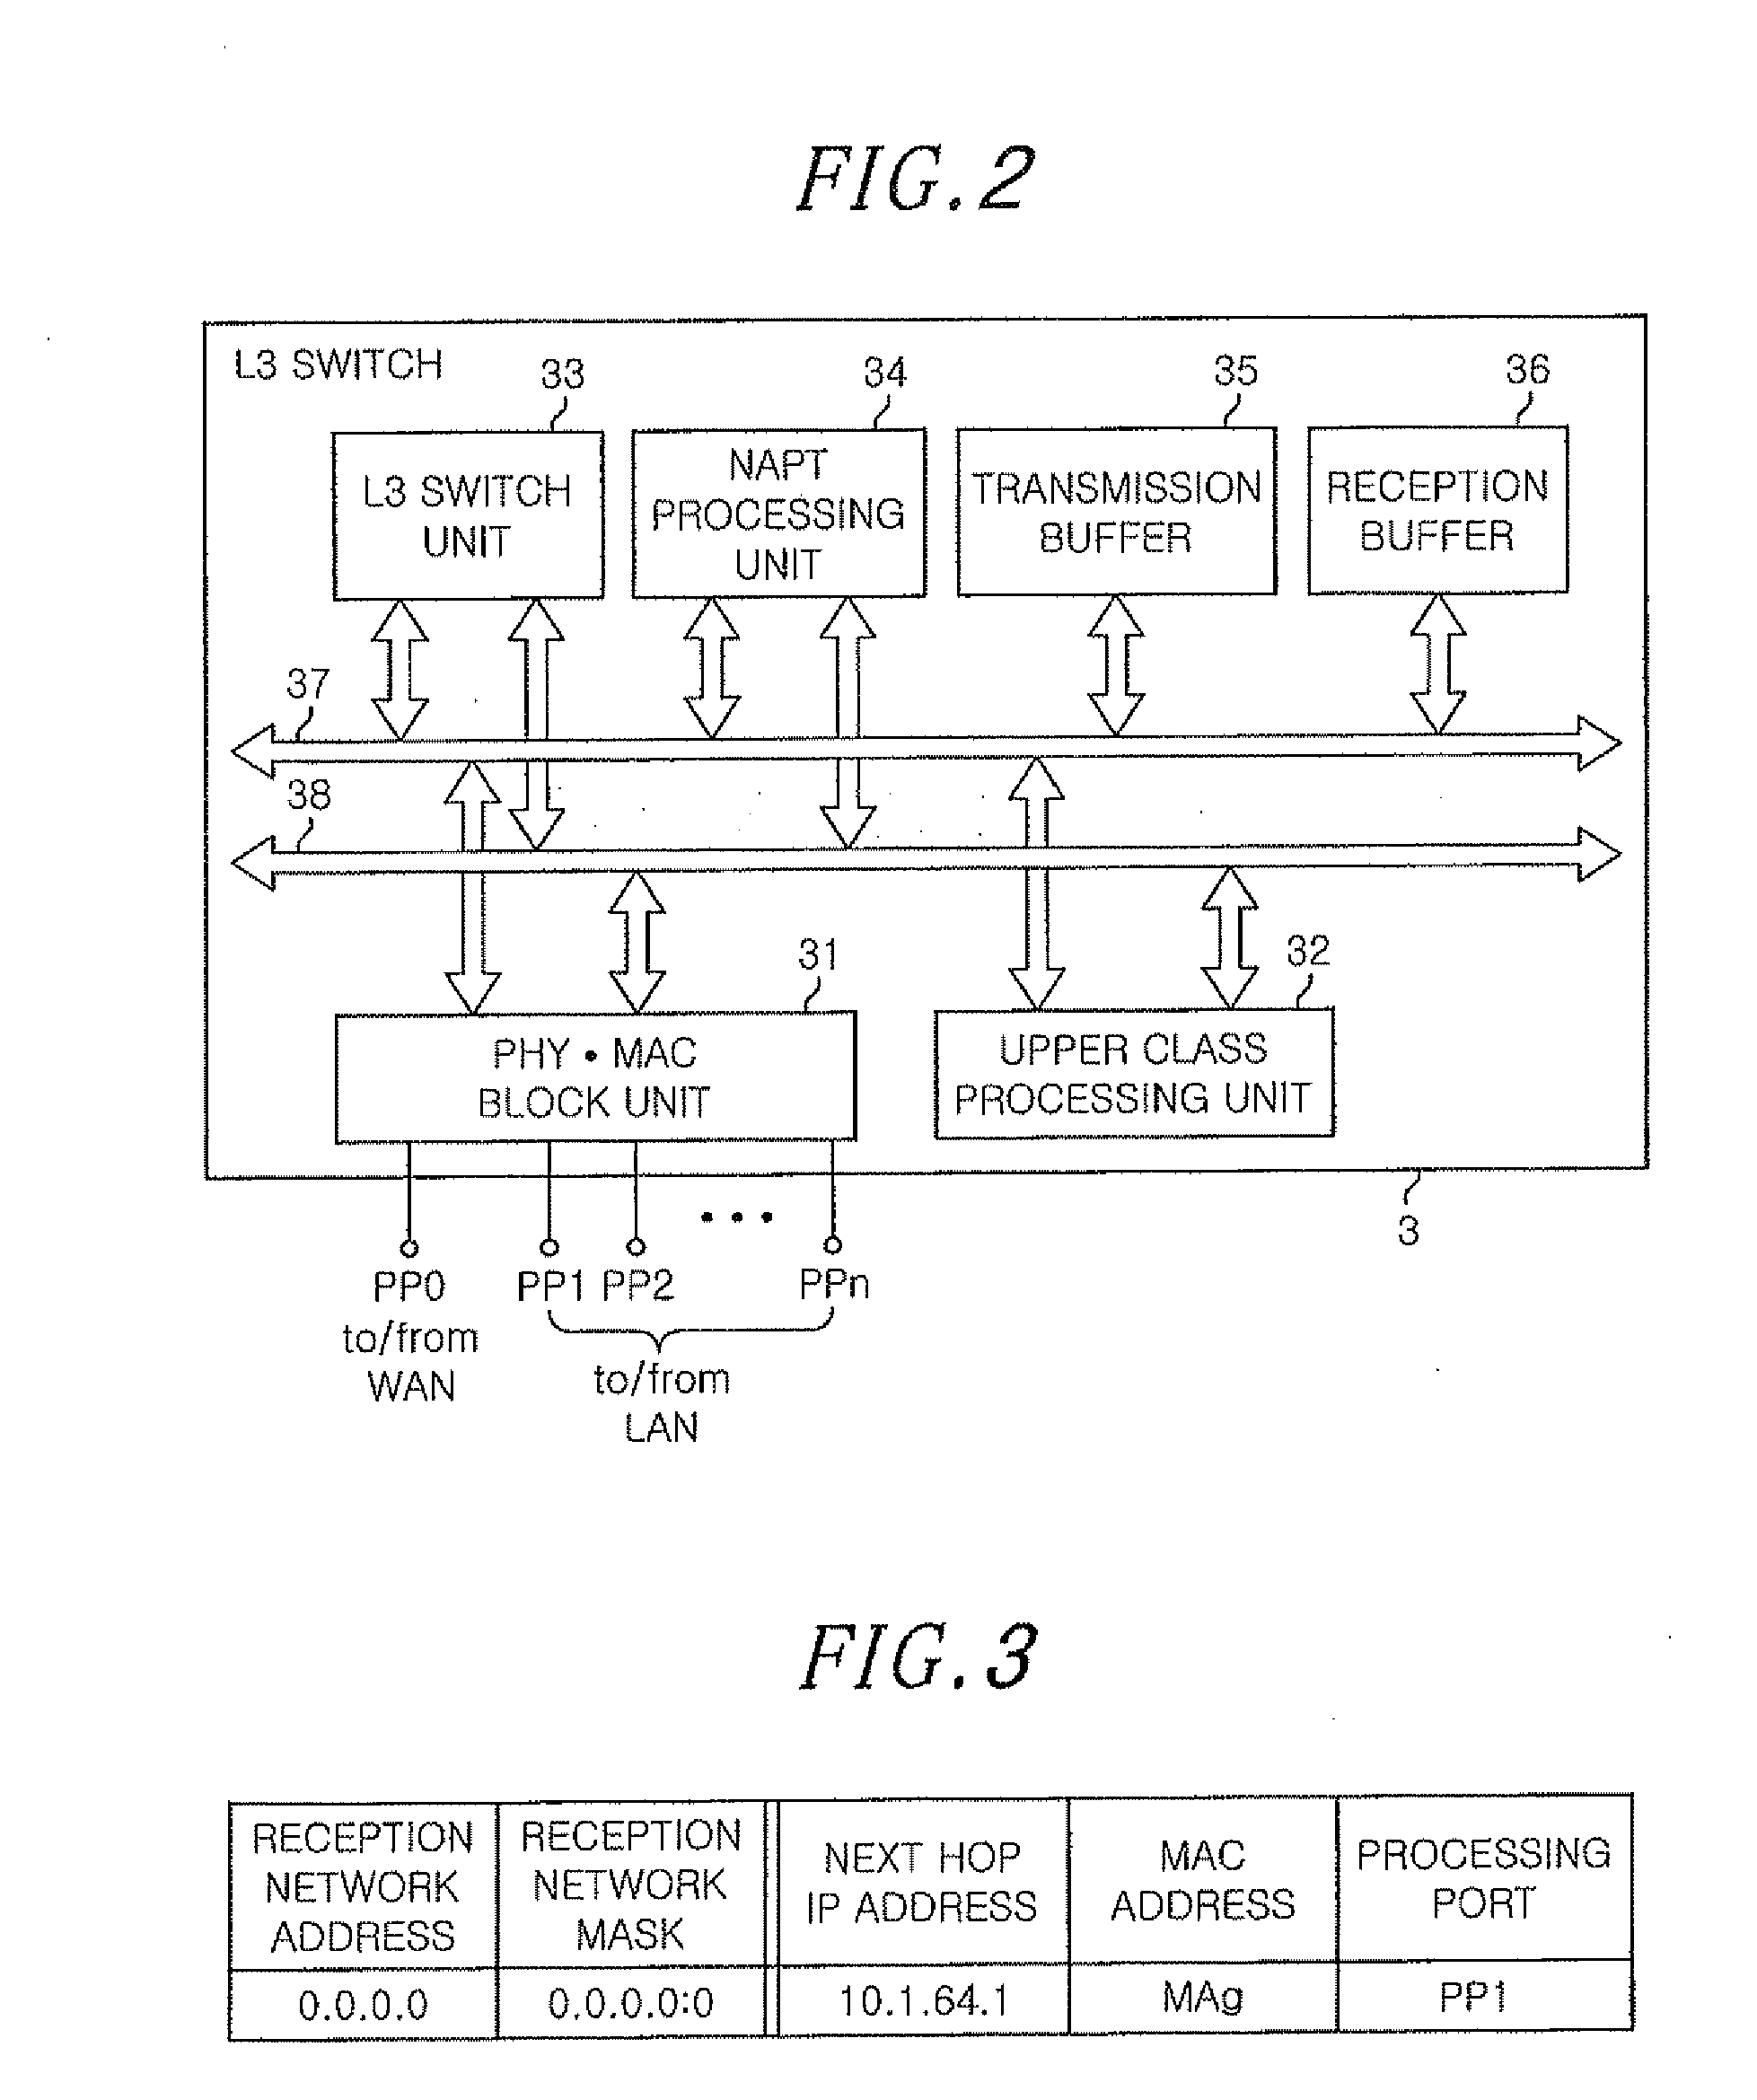 Apparatus for providing connection between networks